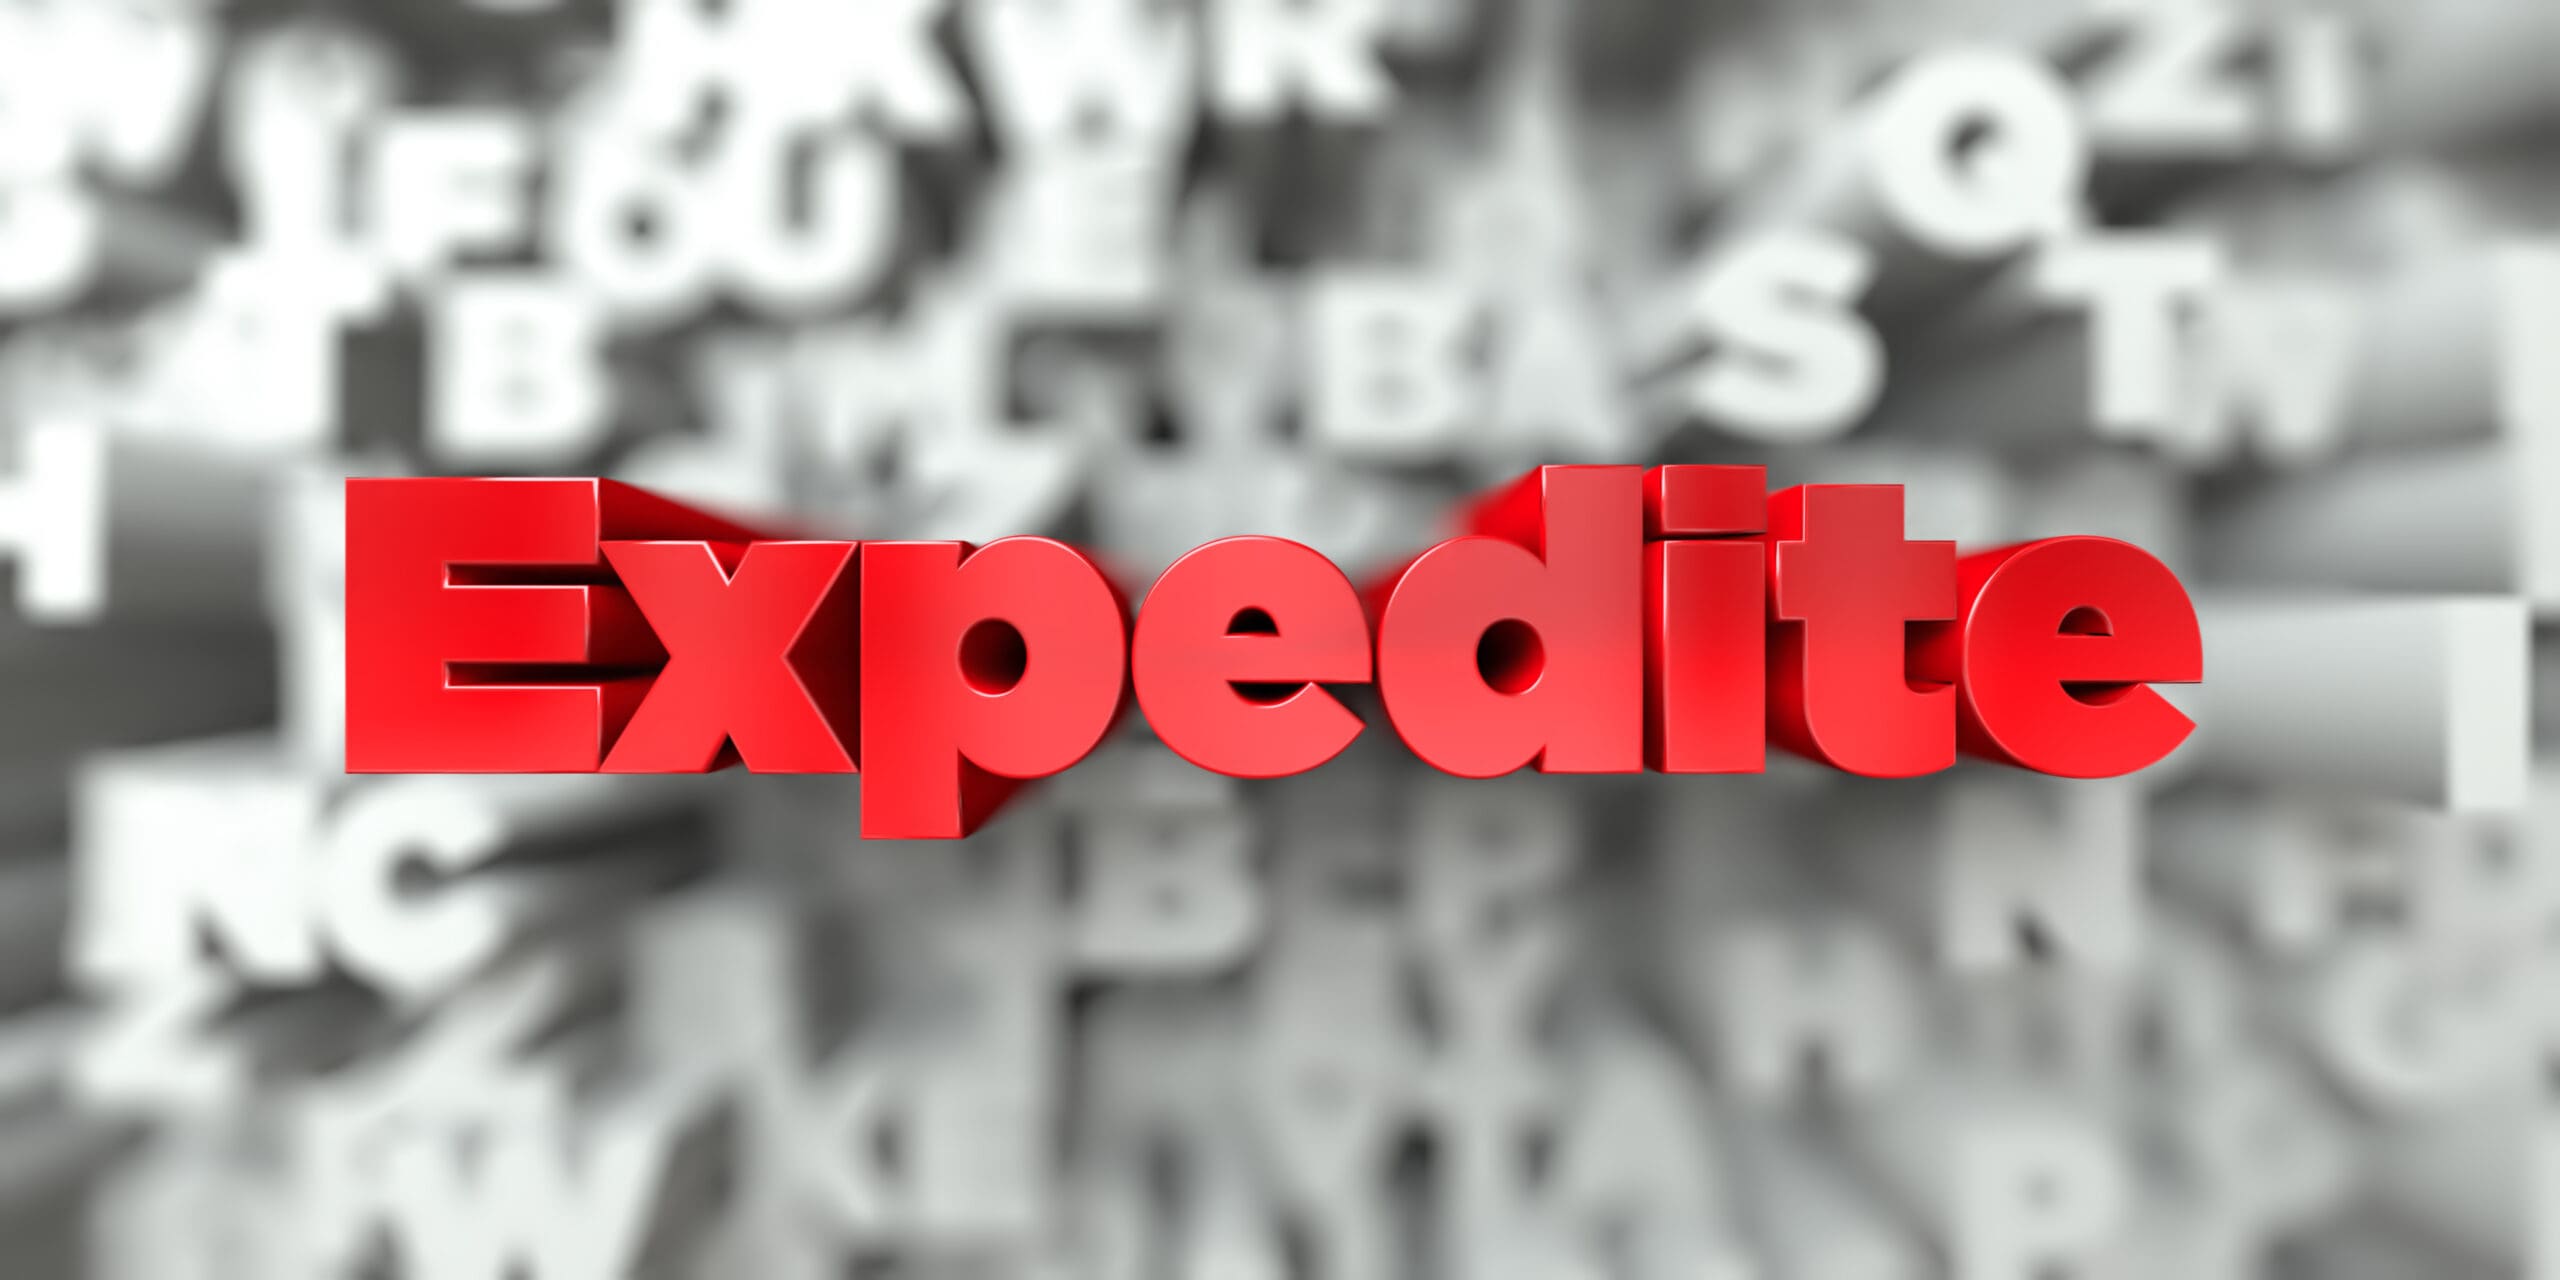 Bold red 3D text spells out "Expedite" against a blurred background of white letters. The word stands out prominently in the center of the image, drawing immediate attention.